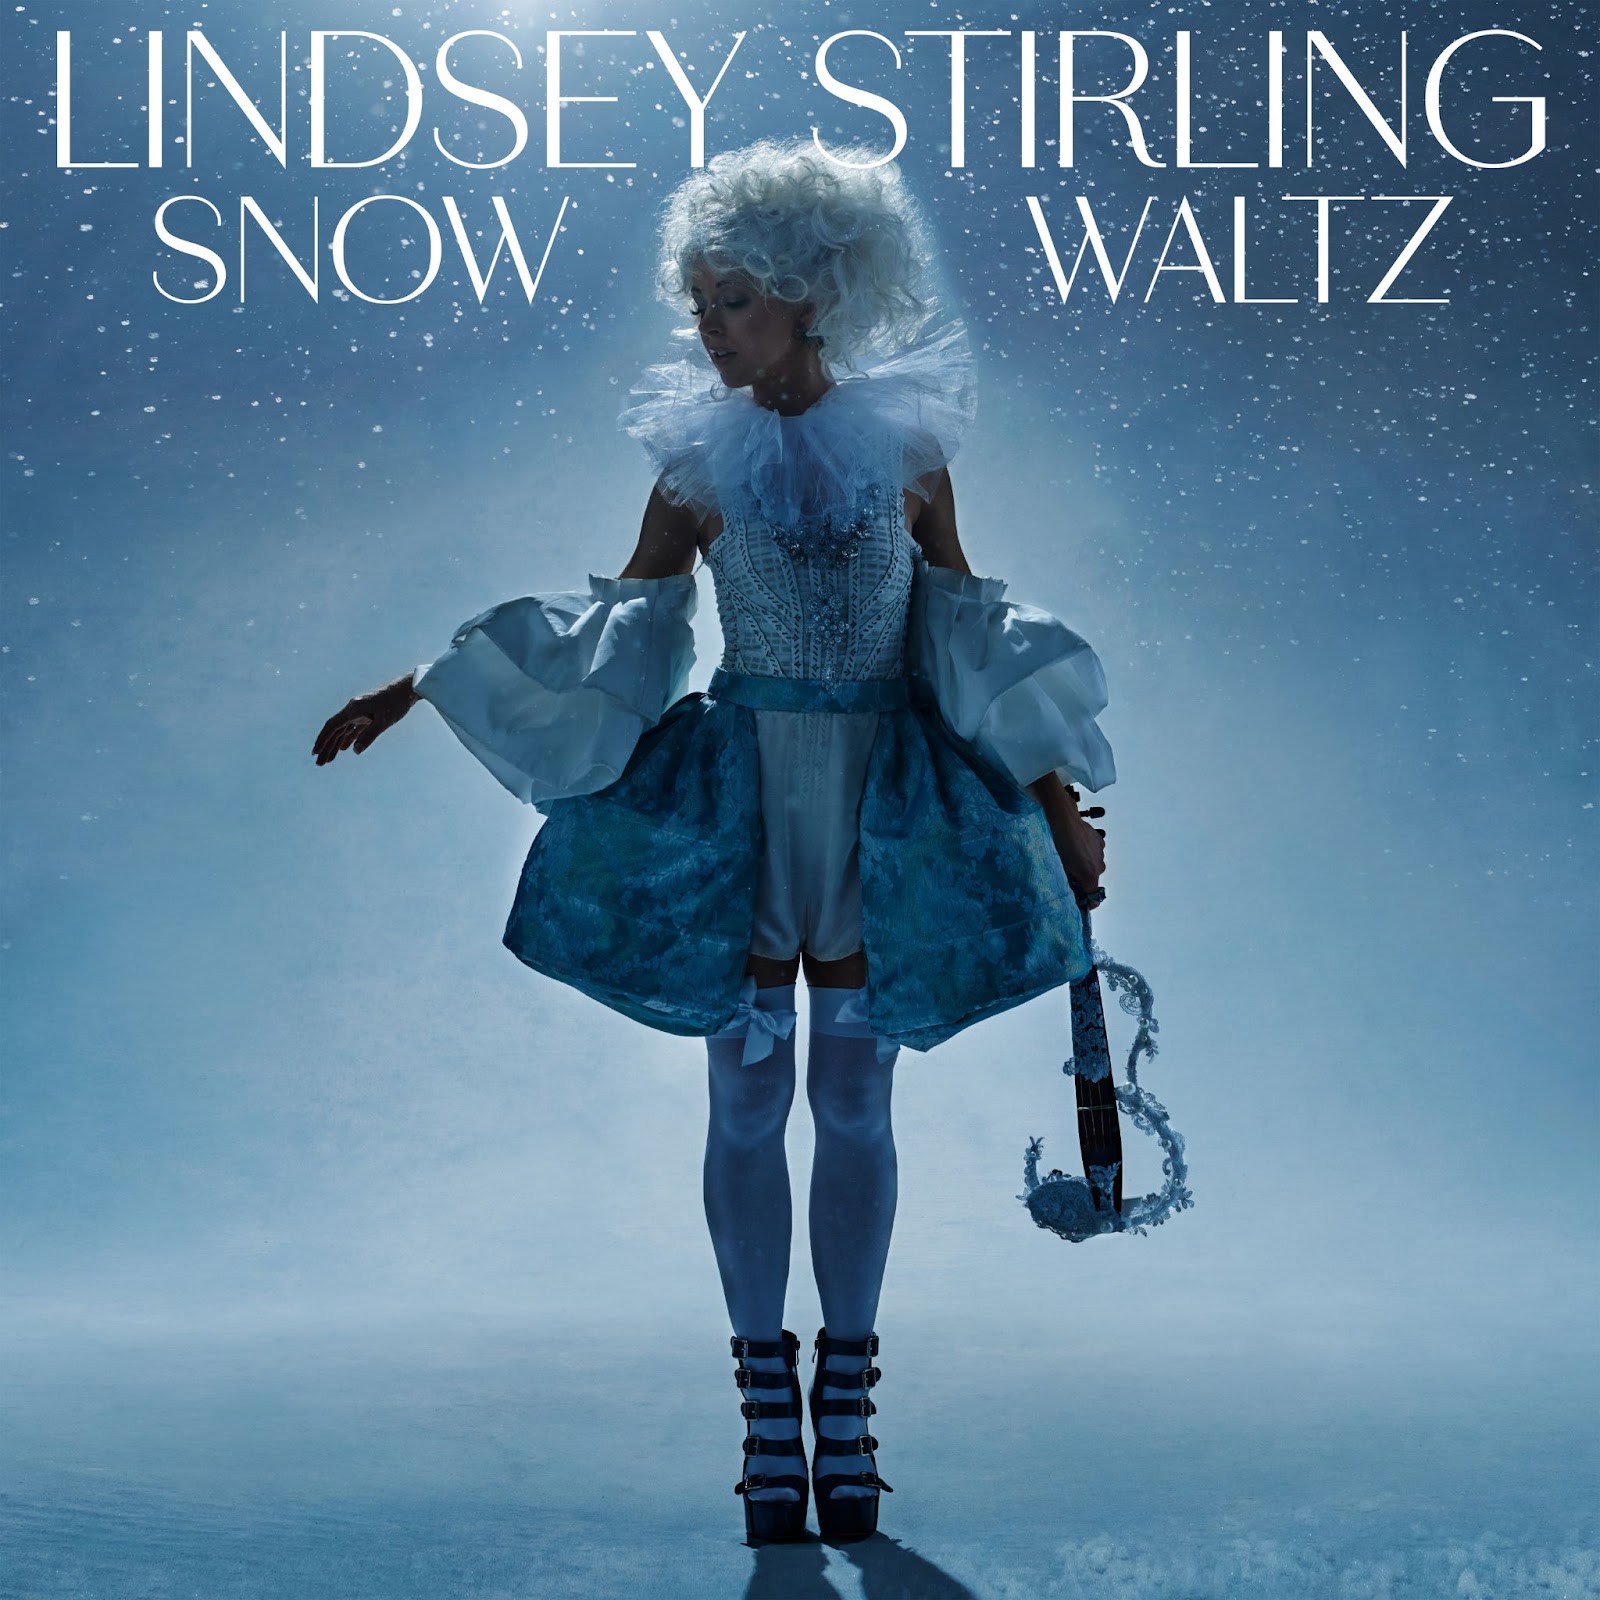 Album cover of Lindsey Stirling's album "Snow Waltz". A woman stands in a snowy expanse holding a violin.